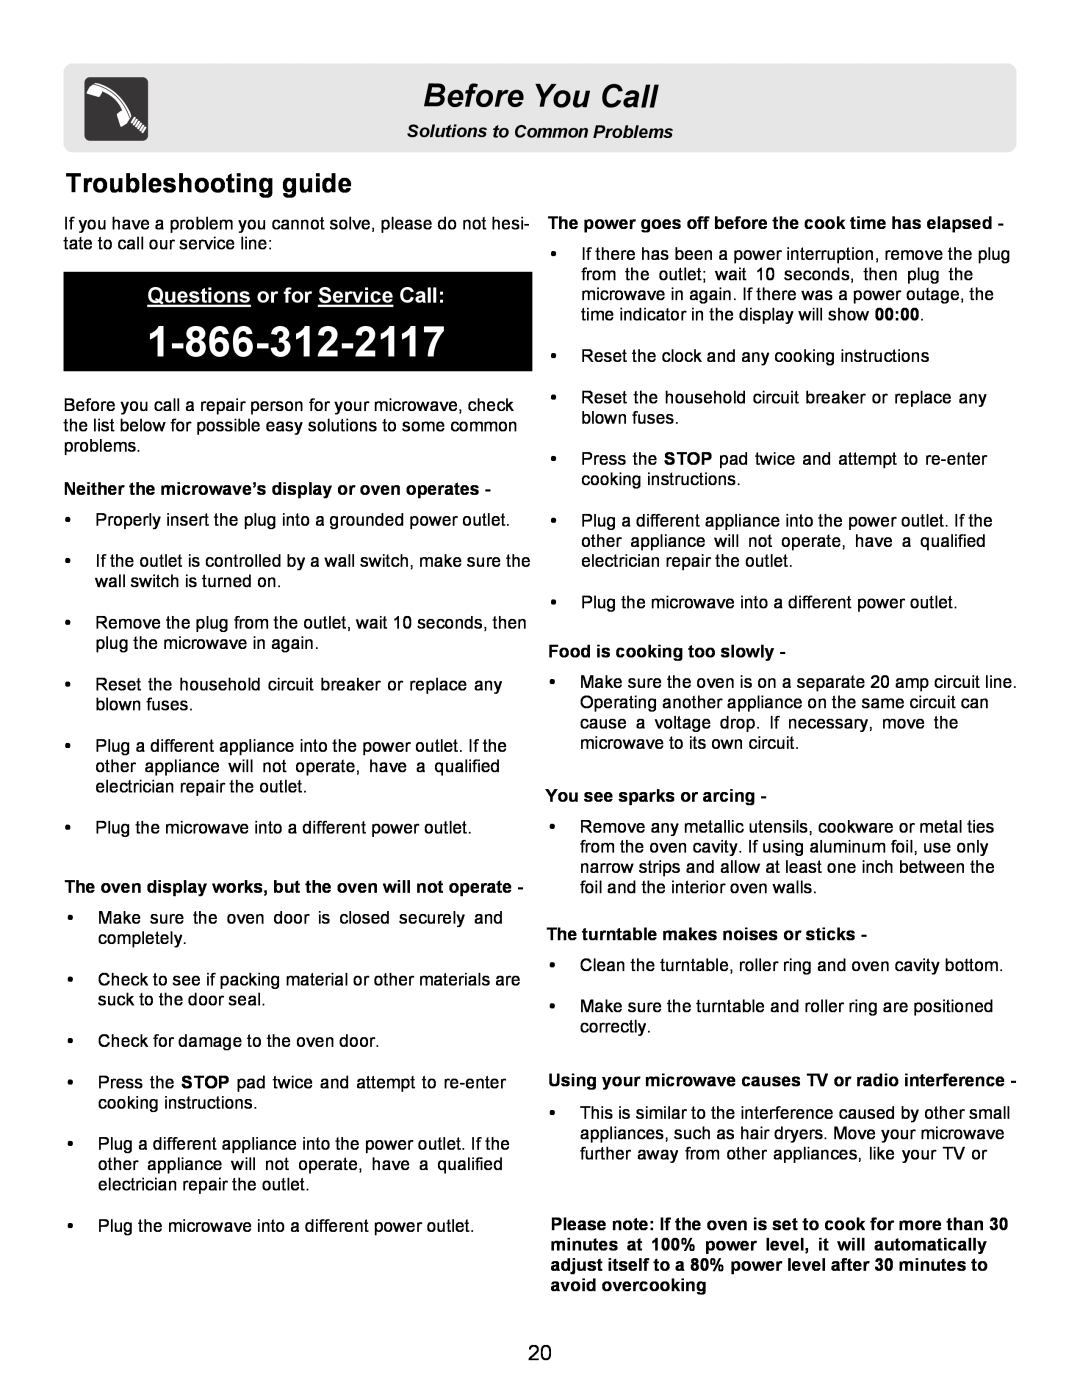 Frigidaire FFCE1638LW Troubleshooting guide, The power goes off before the cook time has elapsed, You see sparks or arcing 